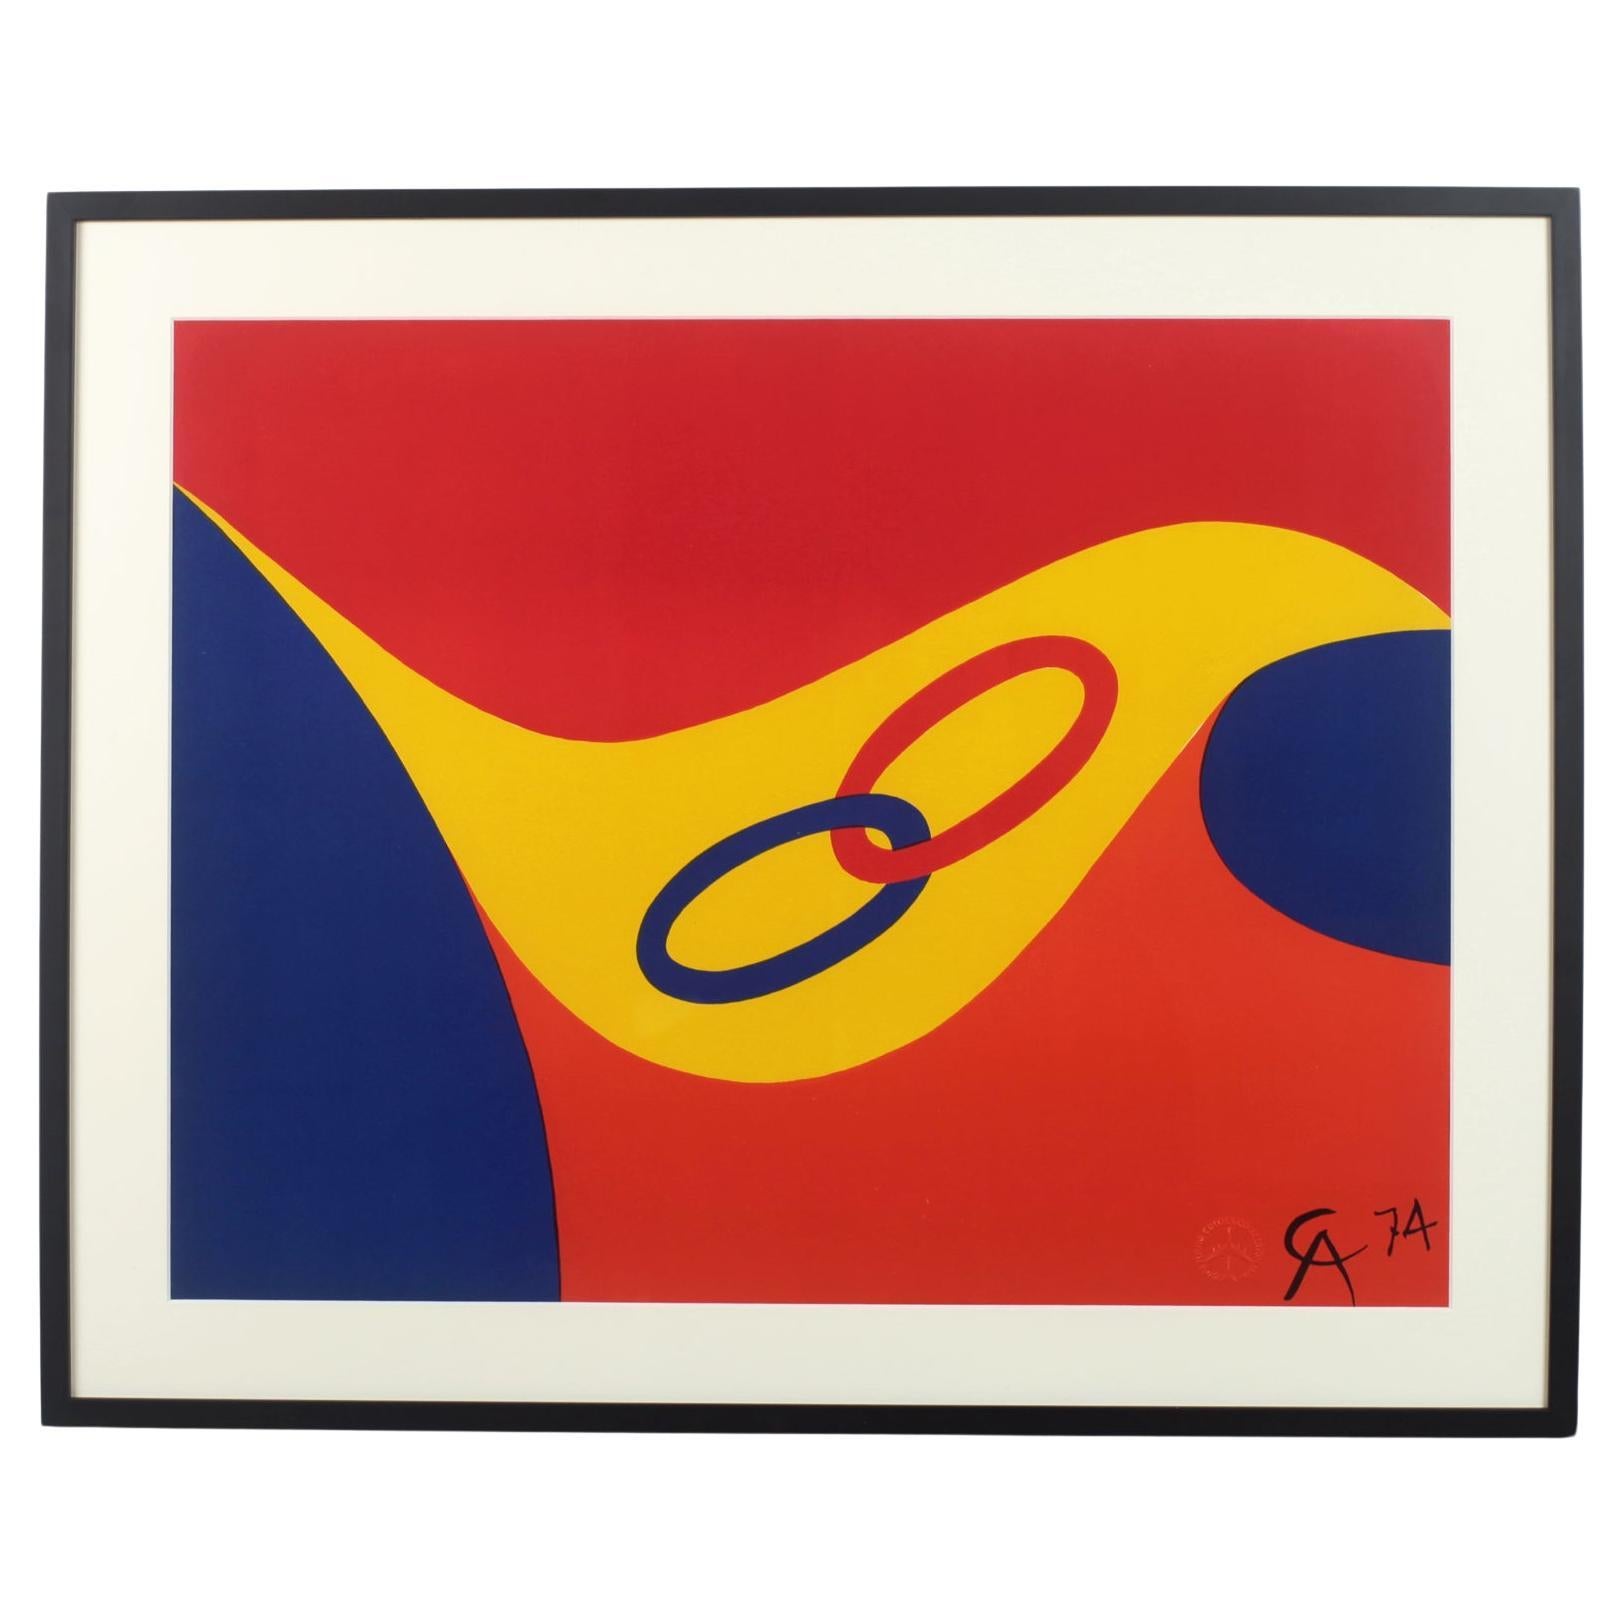 Alexander Calder "Friendship" Lithograph Flying Colors Collection 1975 For Sale